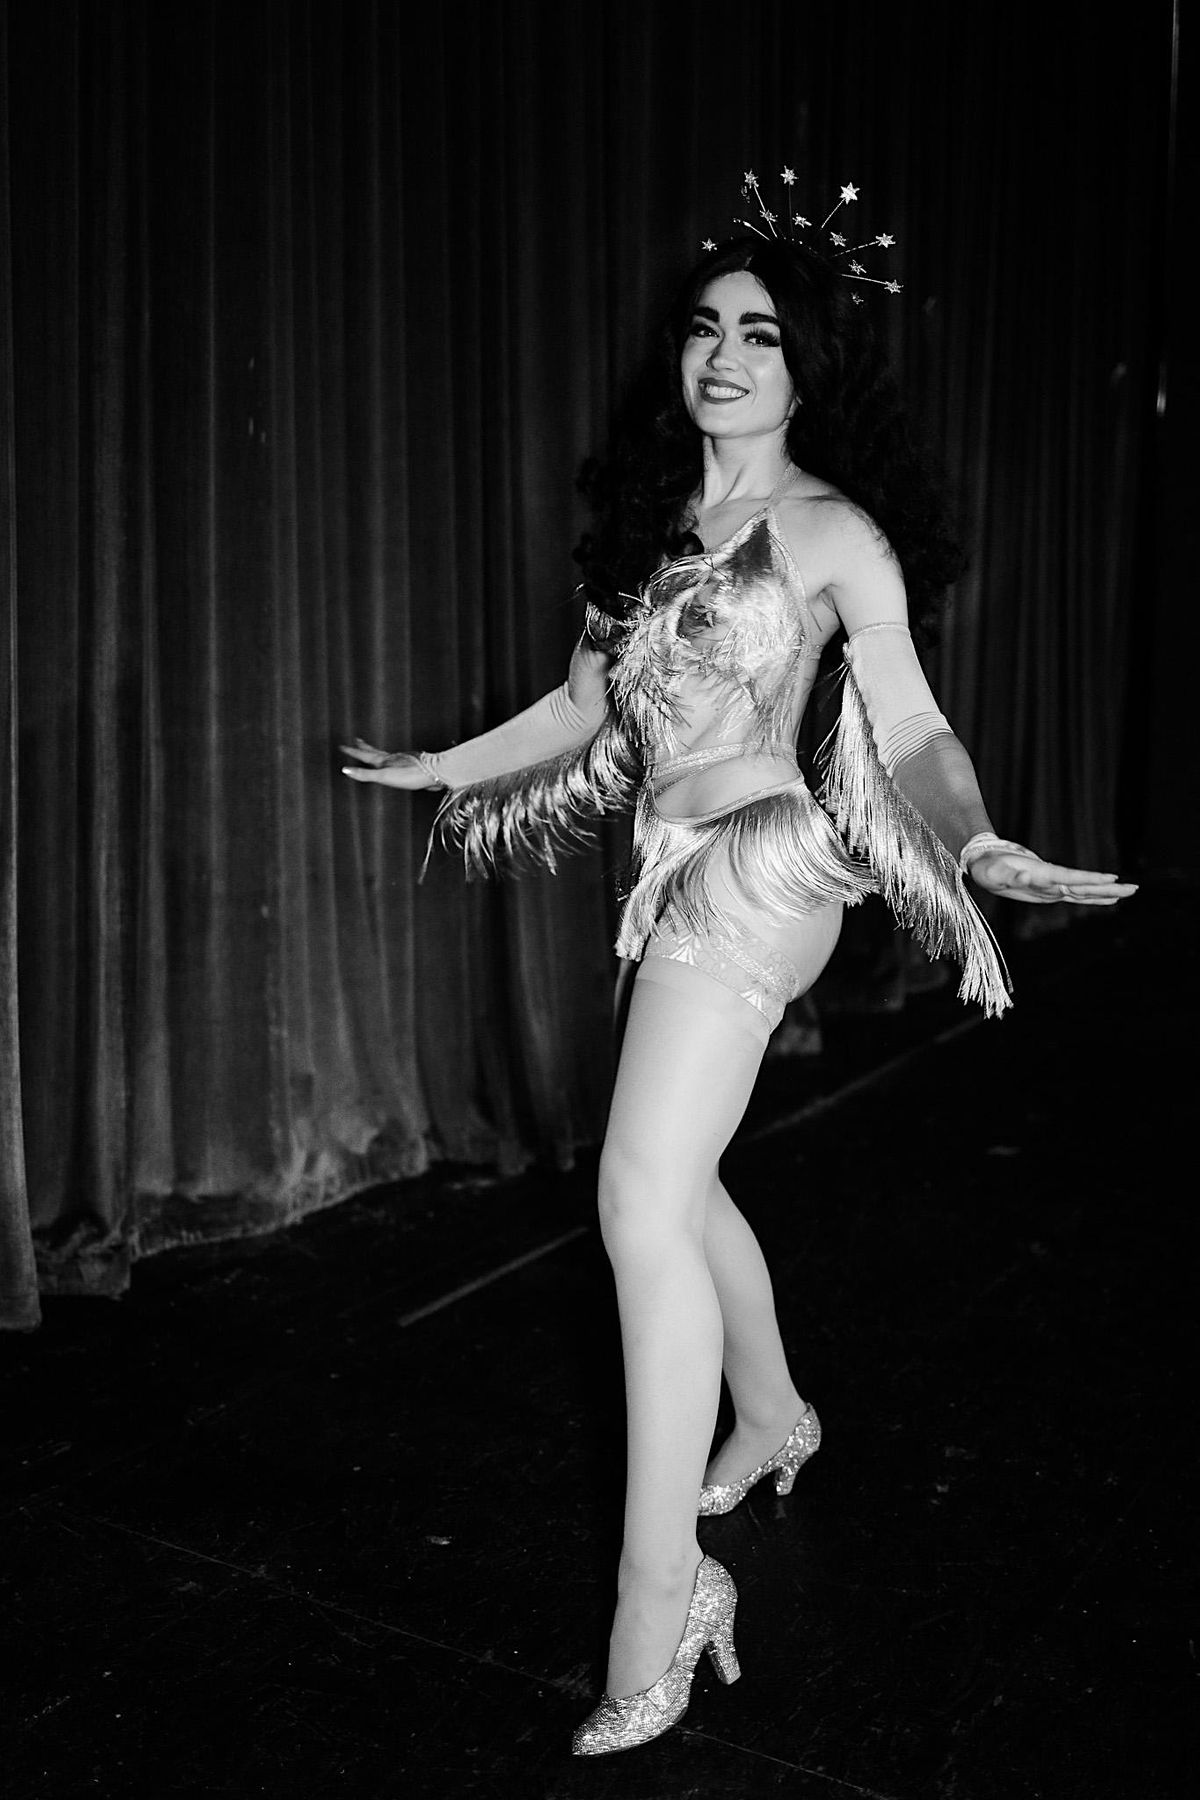 Derby Delights (A Classic Burlesque Show for Derby Week)